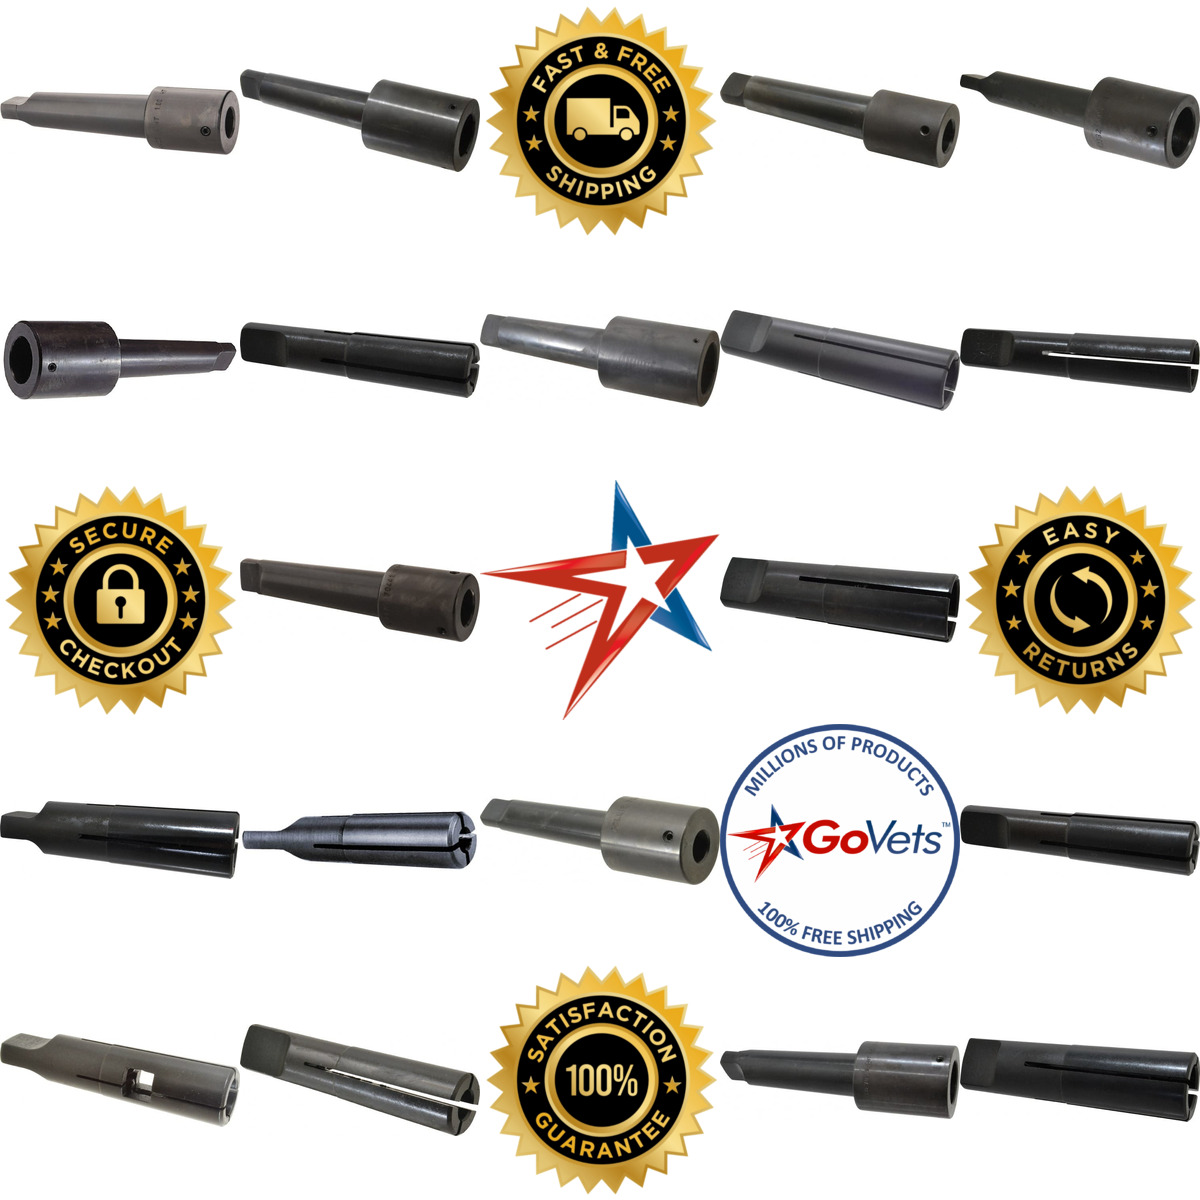 A selection of Collis Tool products on GoVets